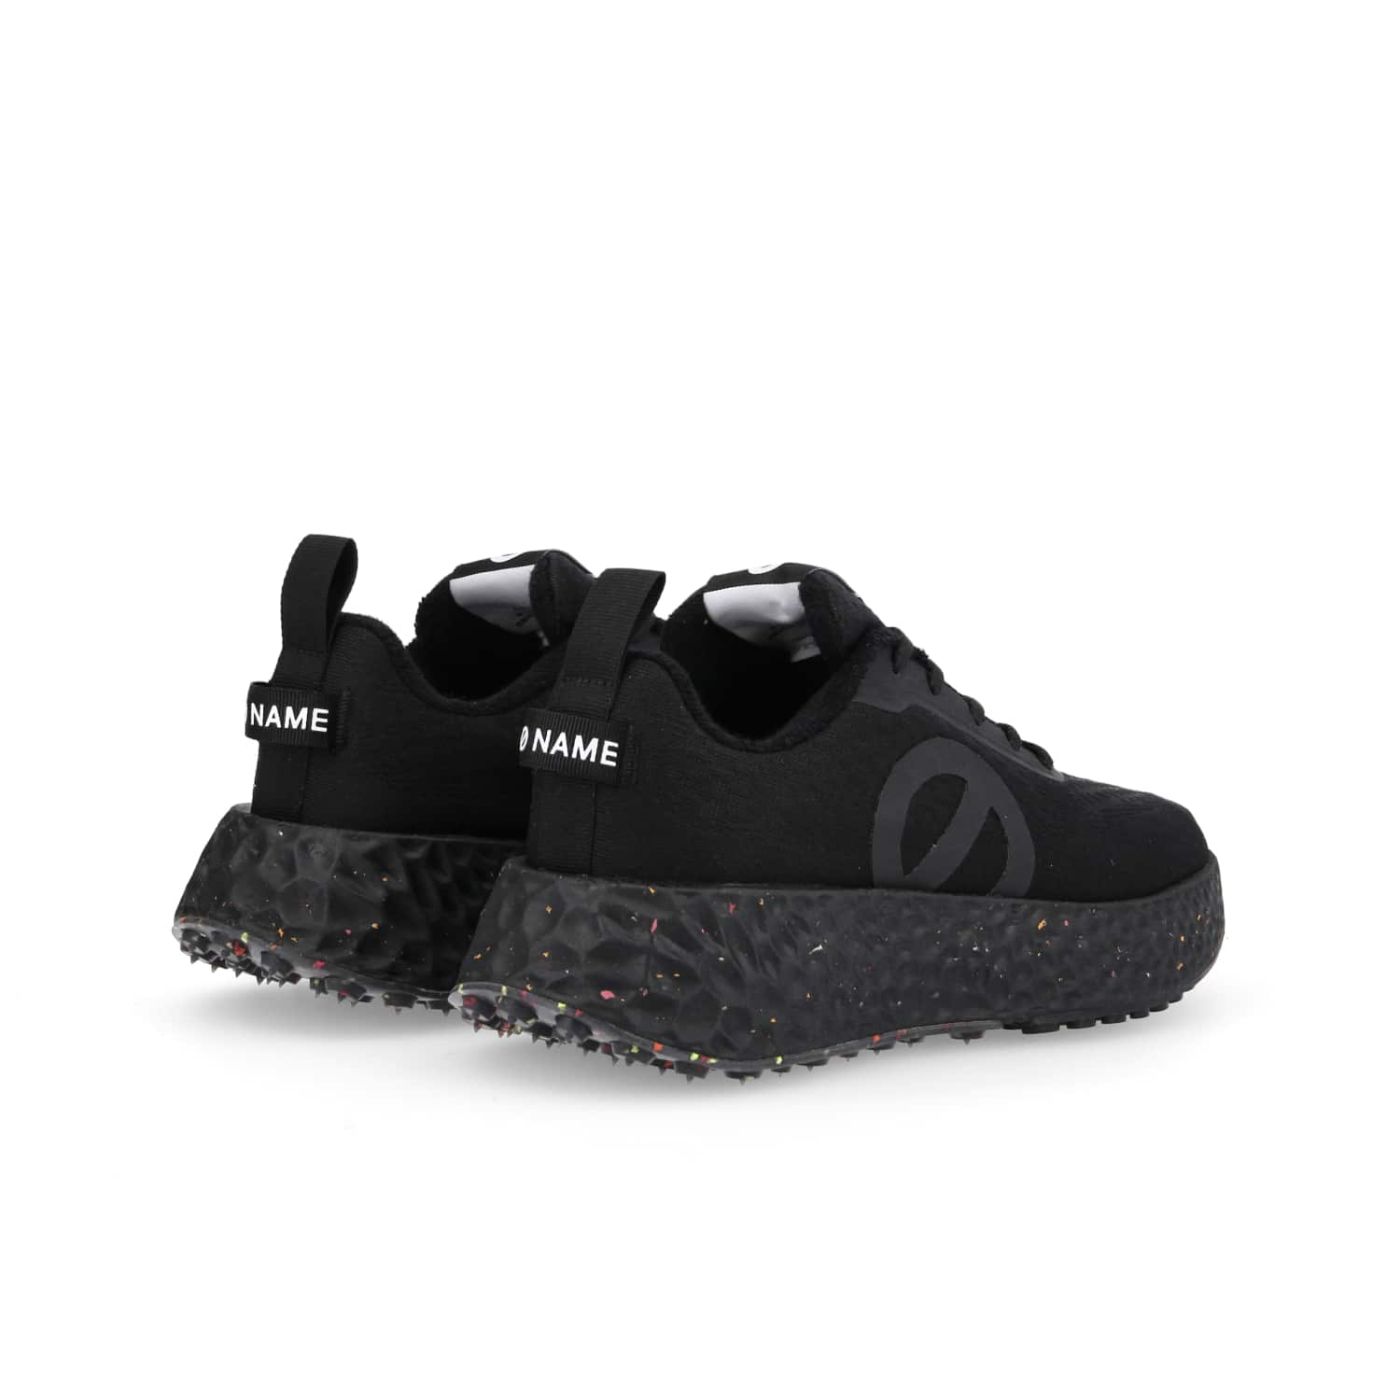 CARTER FLY M - MESH RECYCLED - BLACK